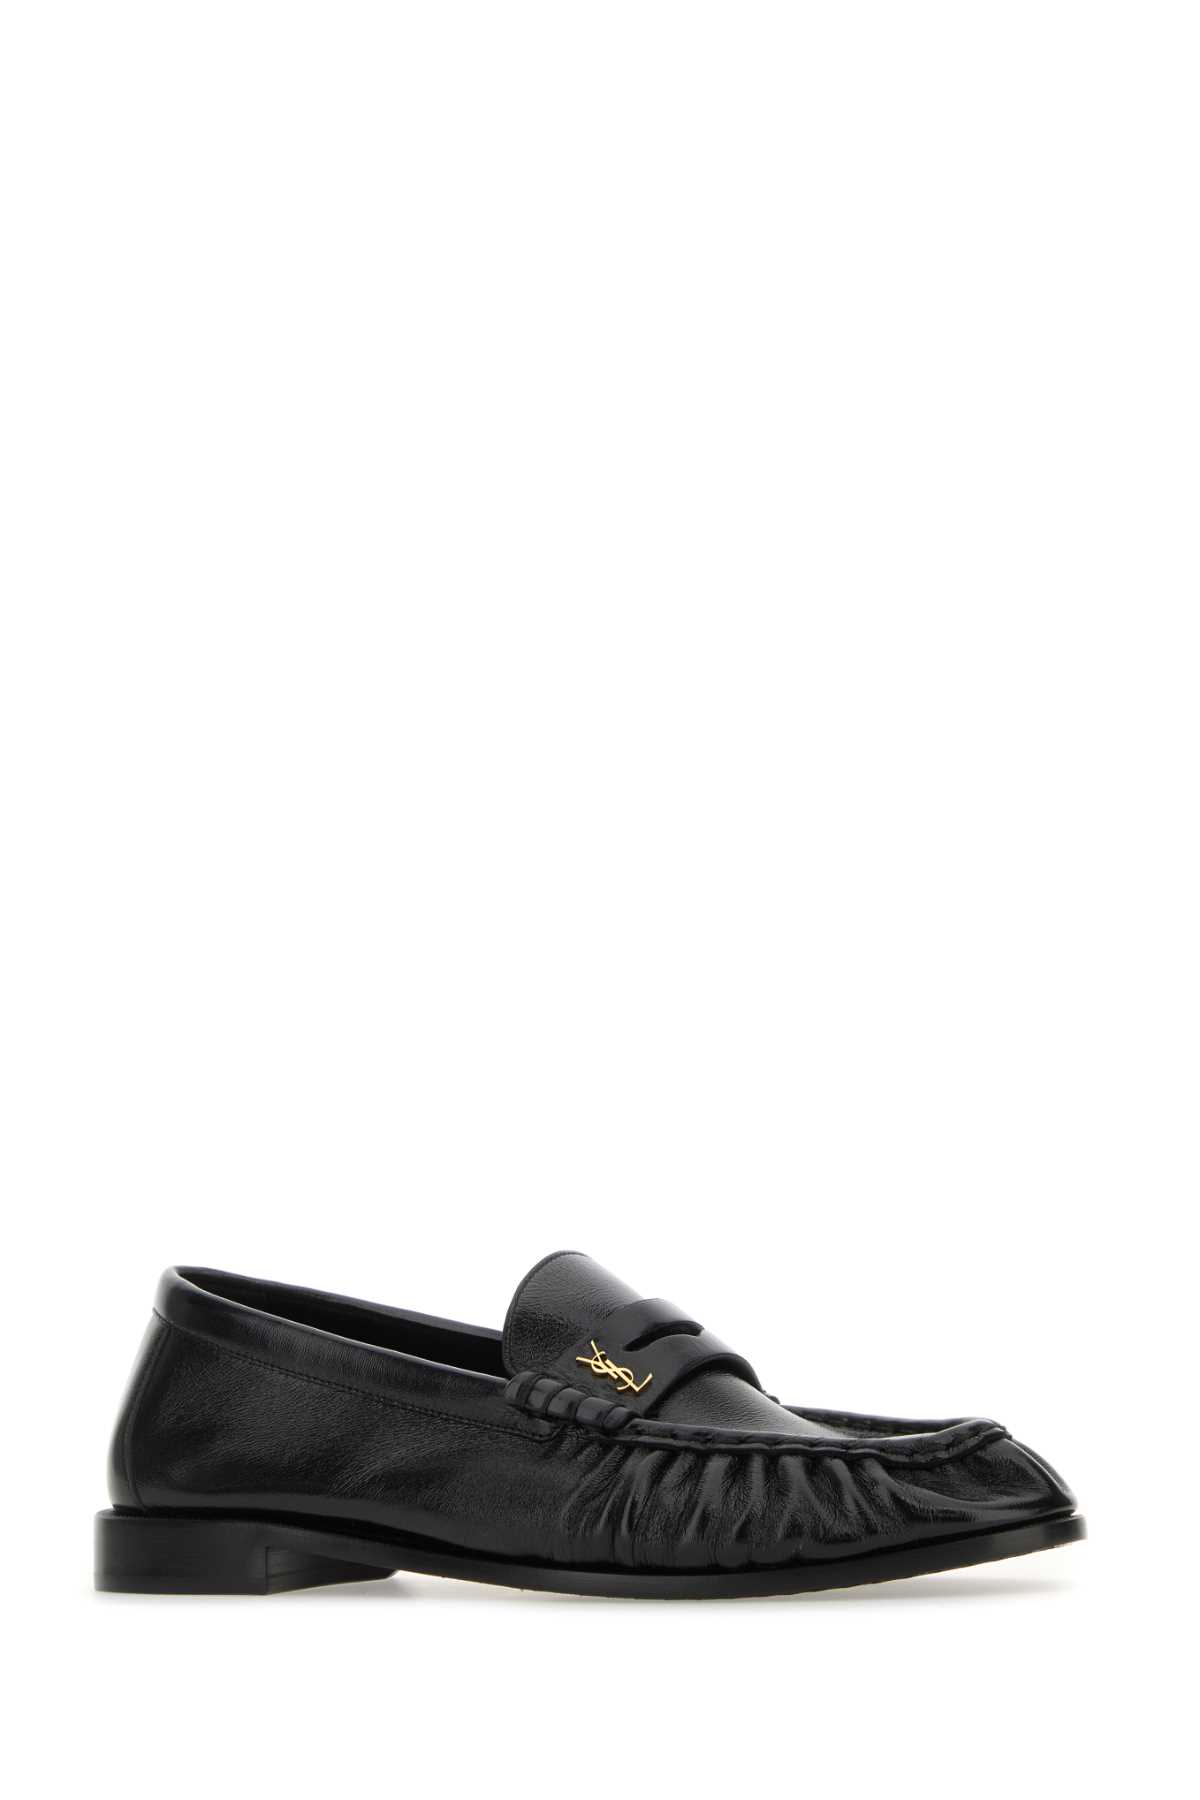 Saint Laurent Black Leather Le Loafer Loafers In Nero